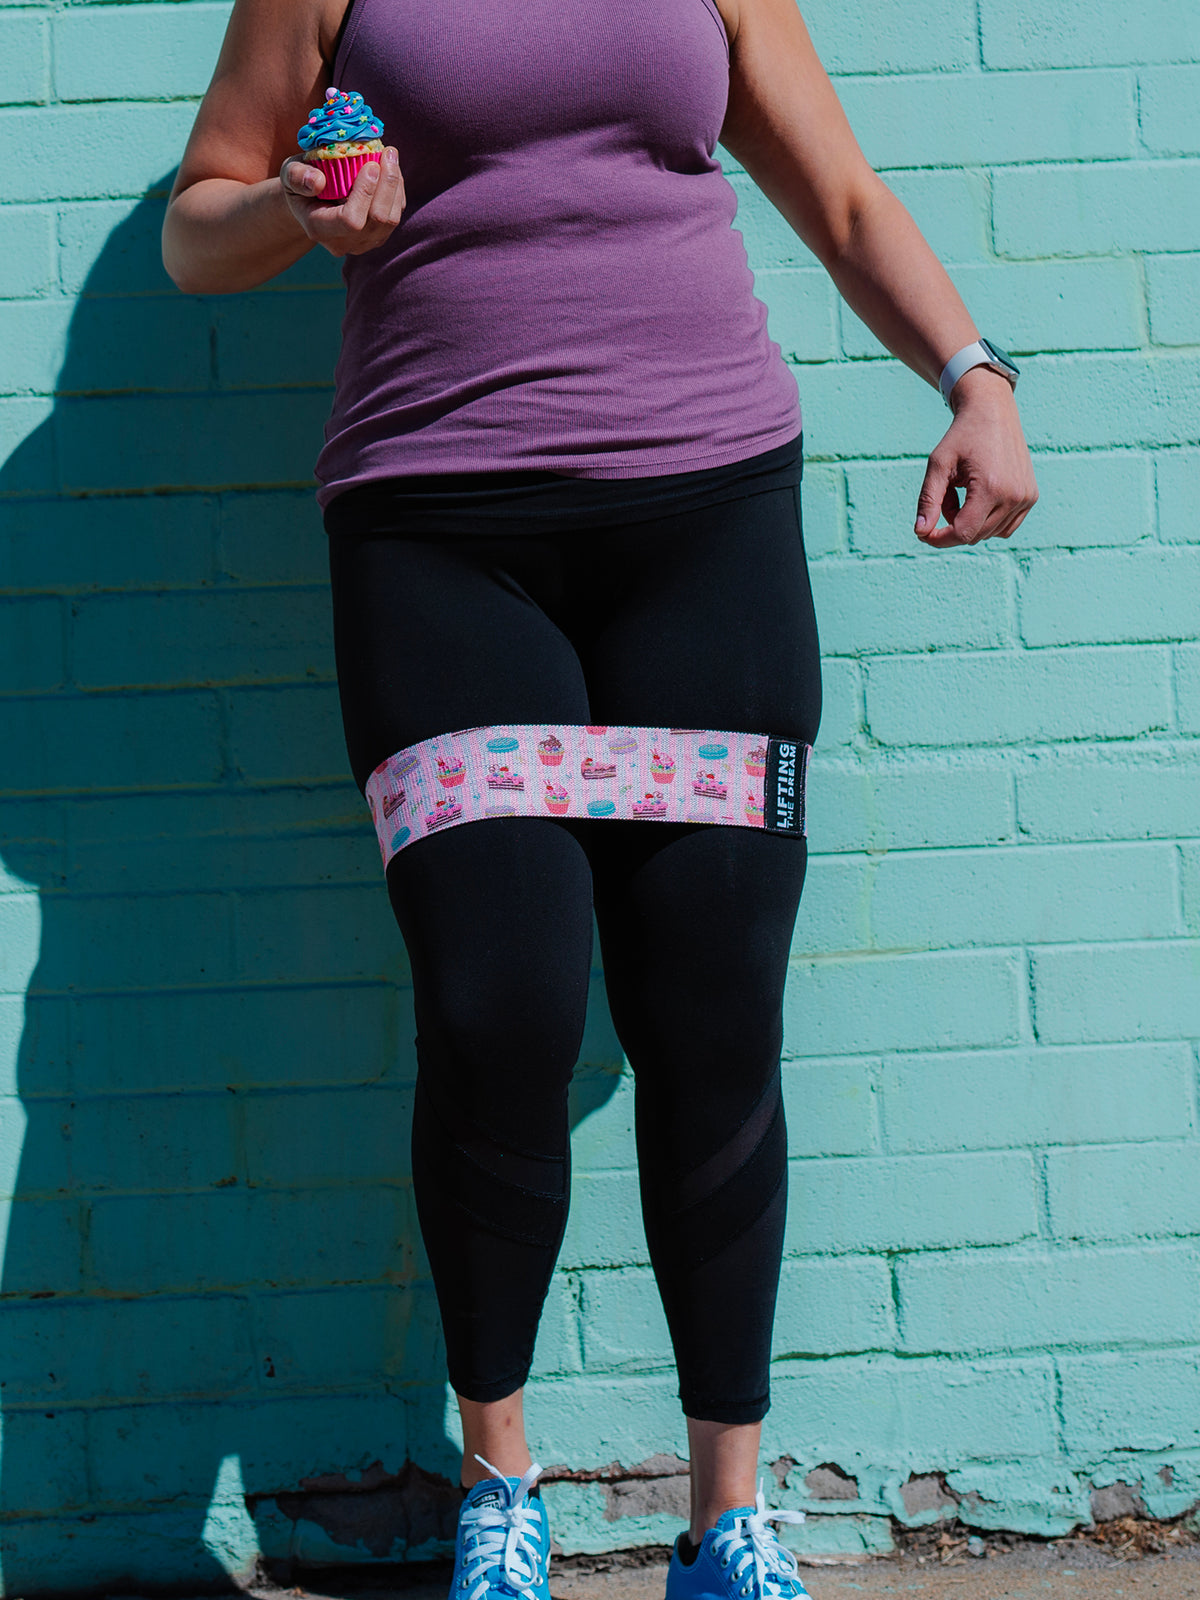 Sweet Cakes Resistance Glute Resistance Band